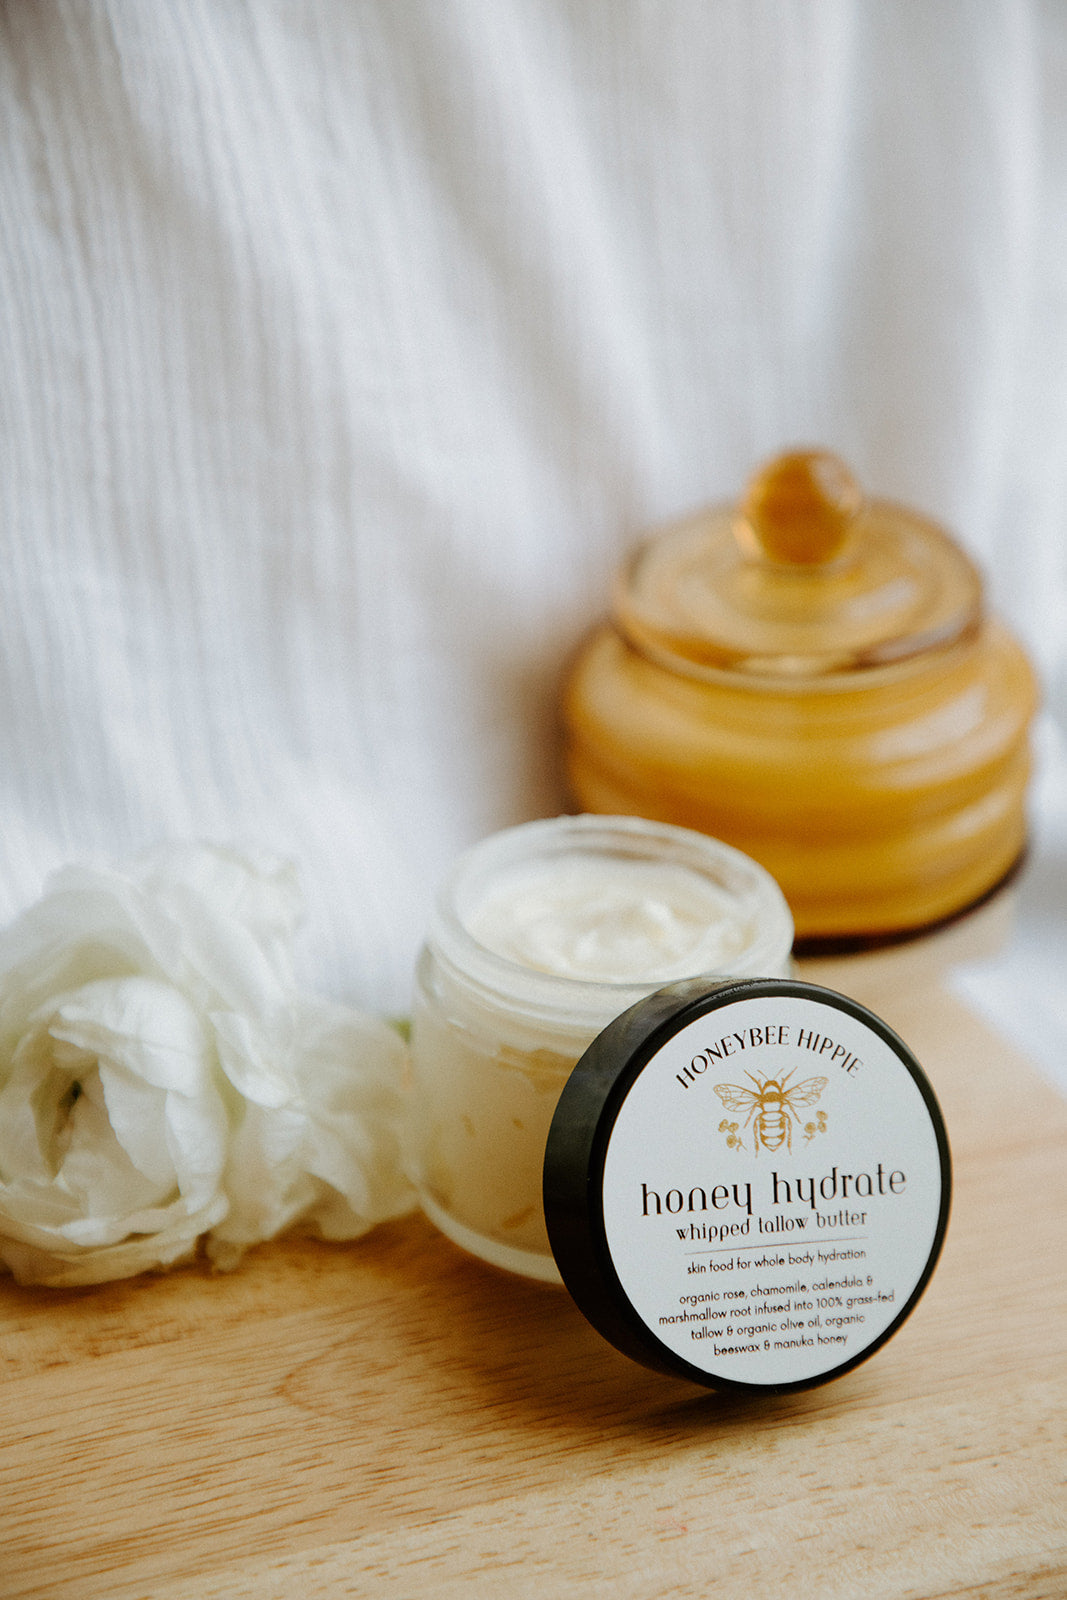 soothe, protect, and heal irritated skin with manuka honey and tallow moisturizer for inflamed and dry skin